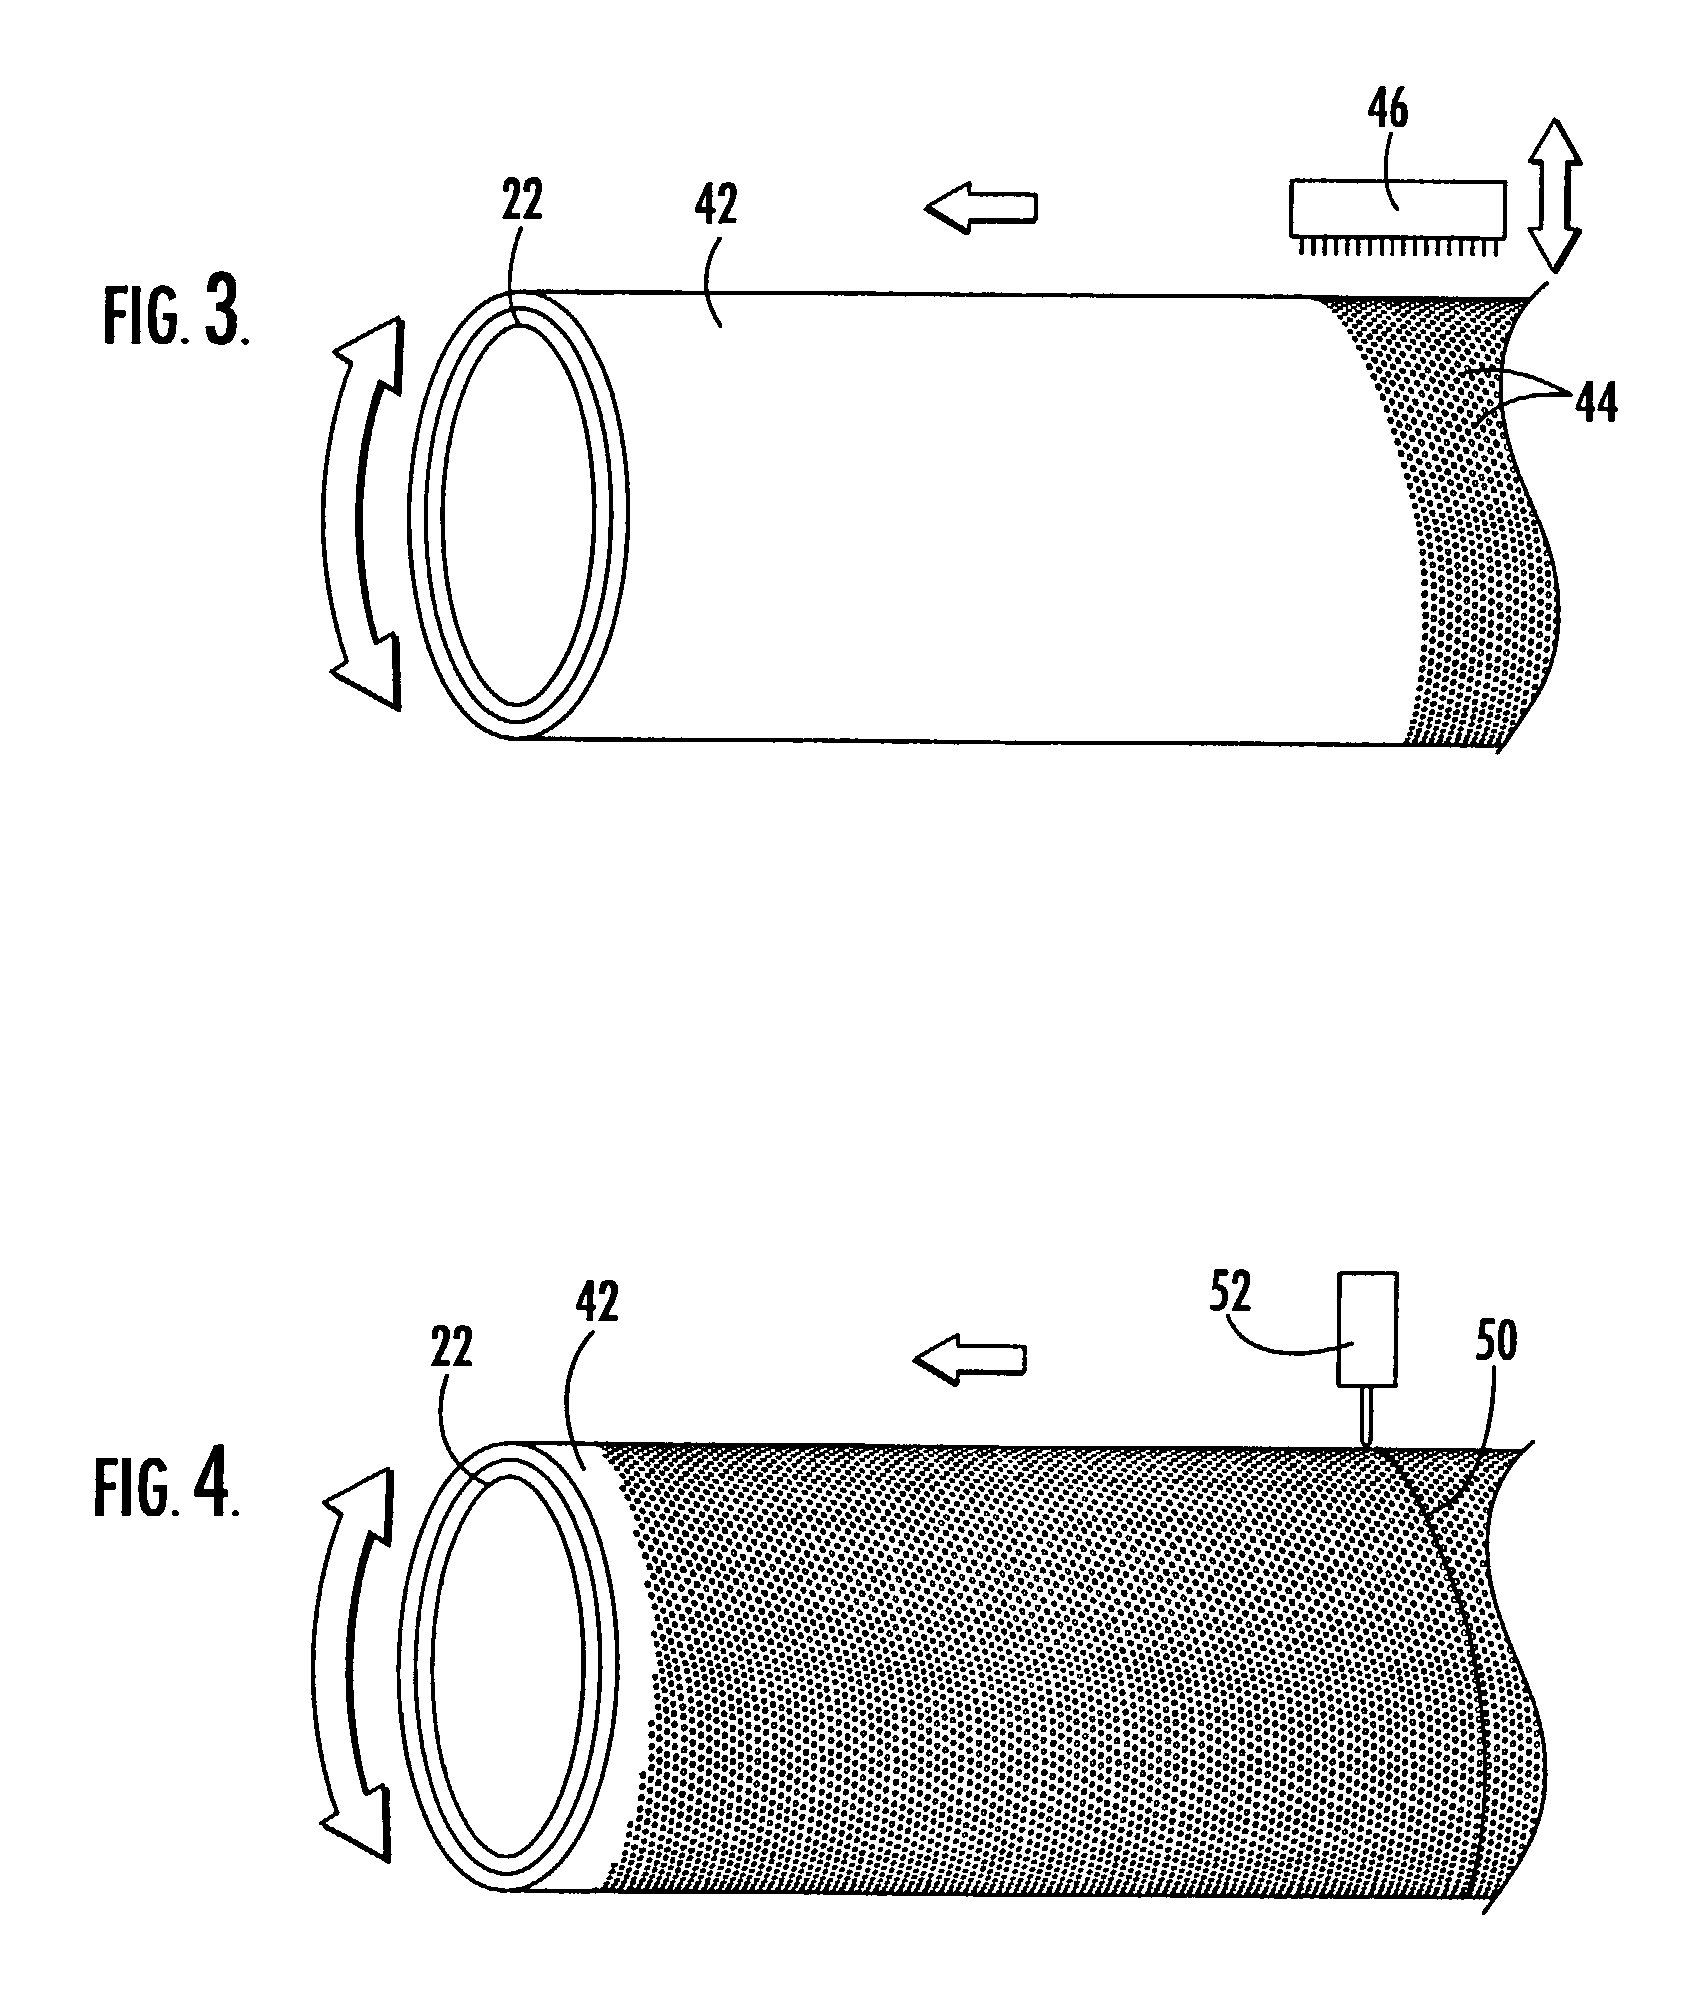 Suction roll with sensors for detecting temperature and/or pressure